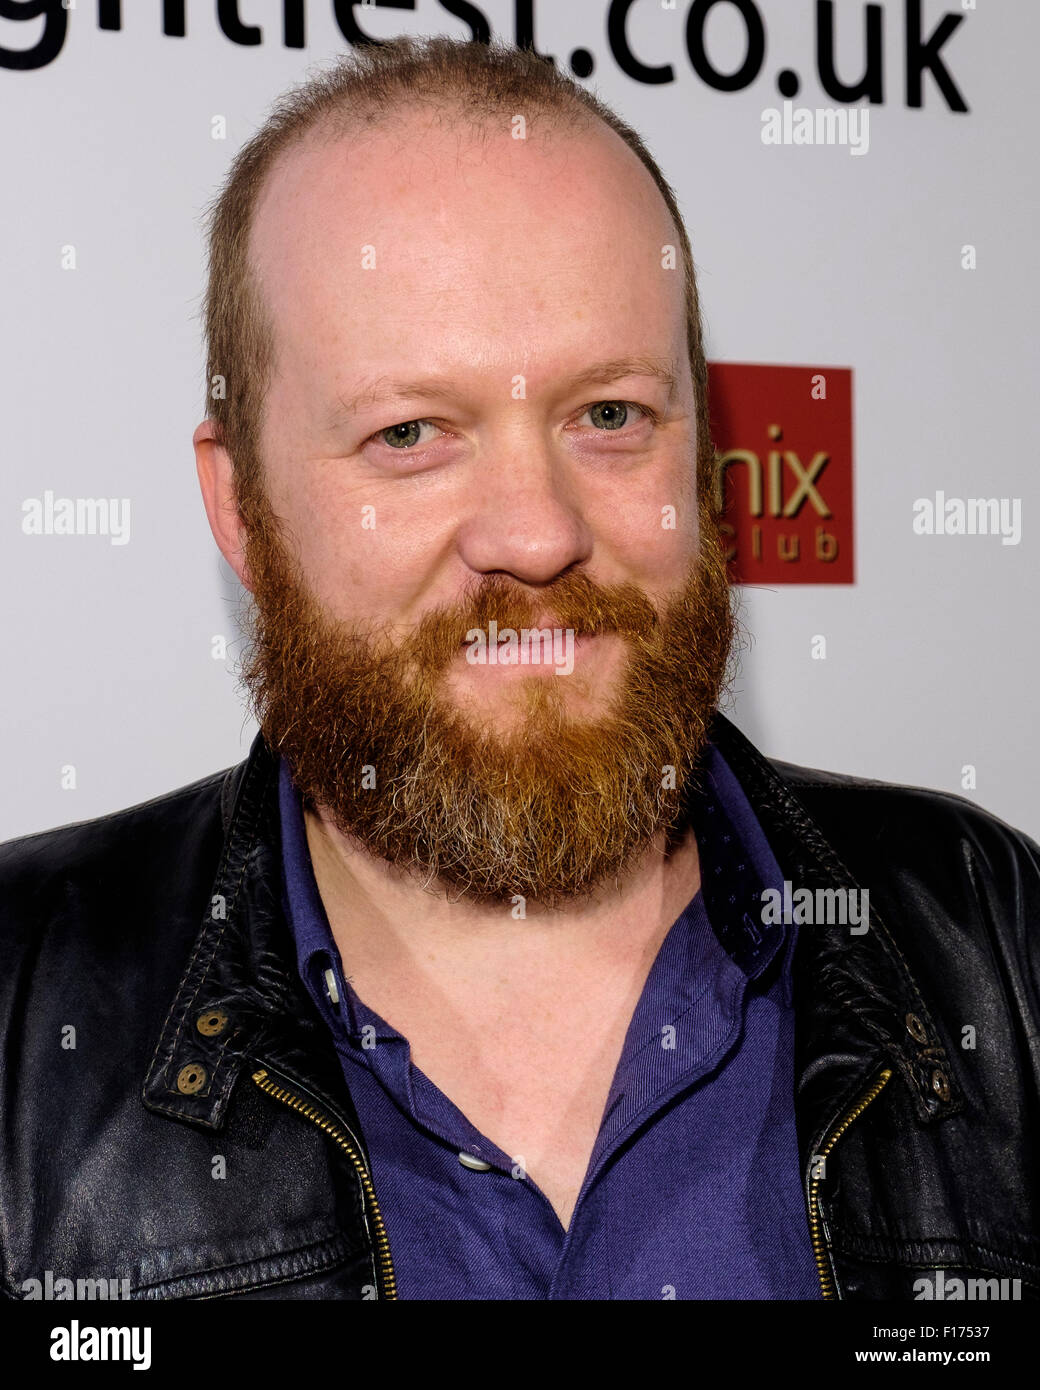 Steve Oram attends the Frightfest 2015 on 28/08/2015 at The VUE West End, London. Steve was attending the World Premiere of Aaaaaaaah!. Picture by Julie Edwards Stock Photo